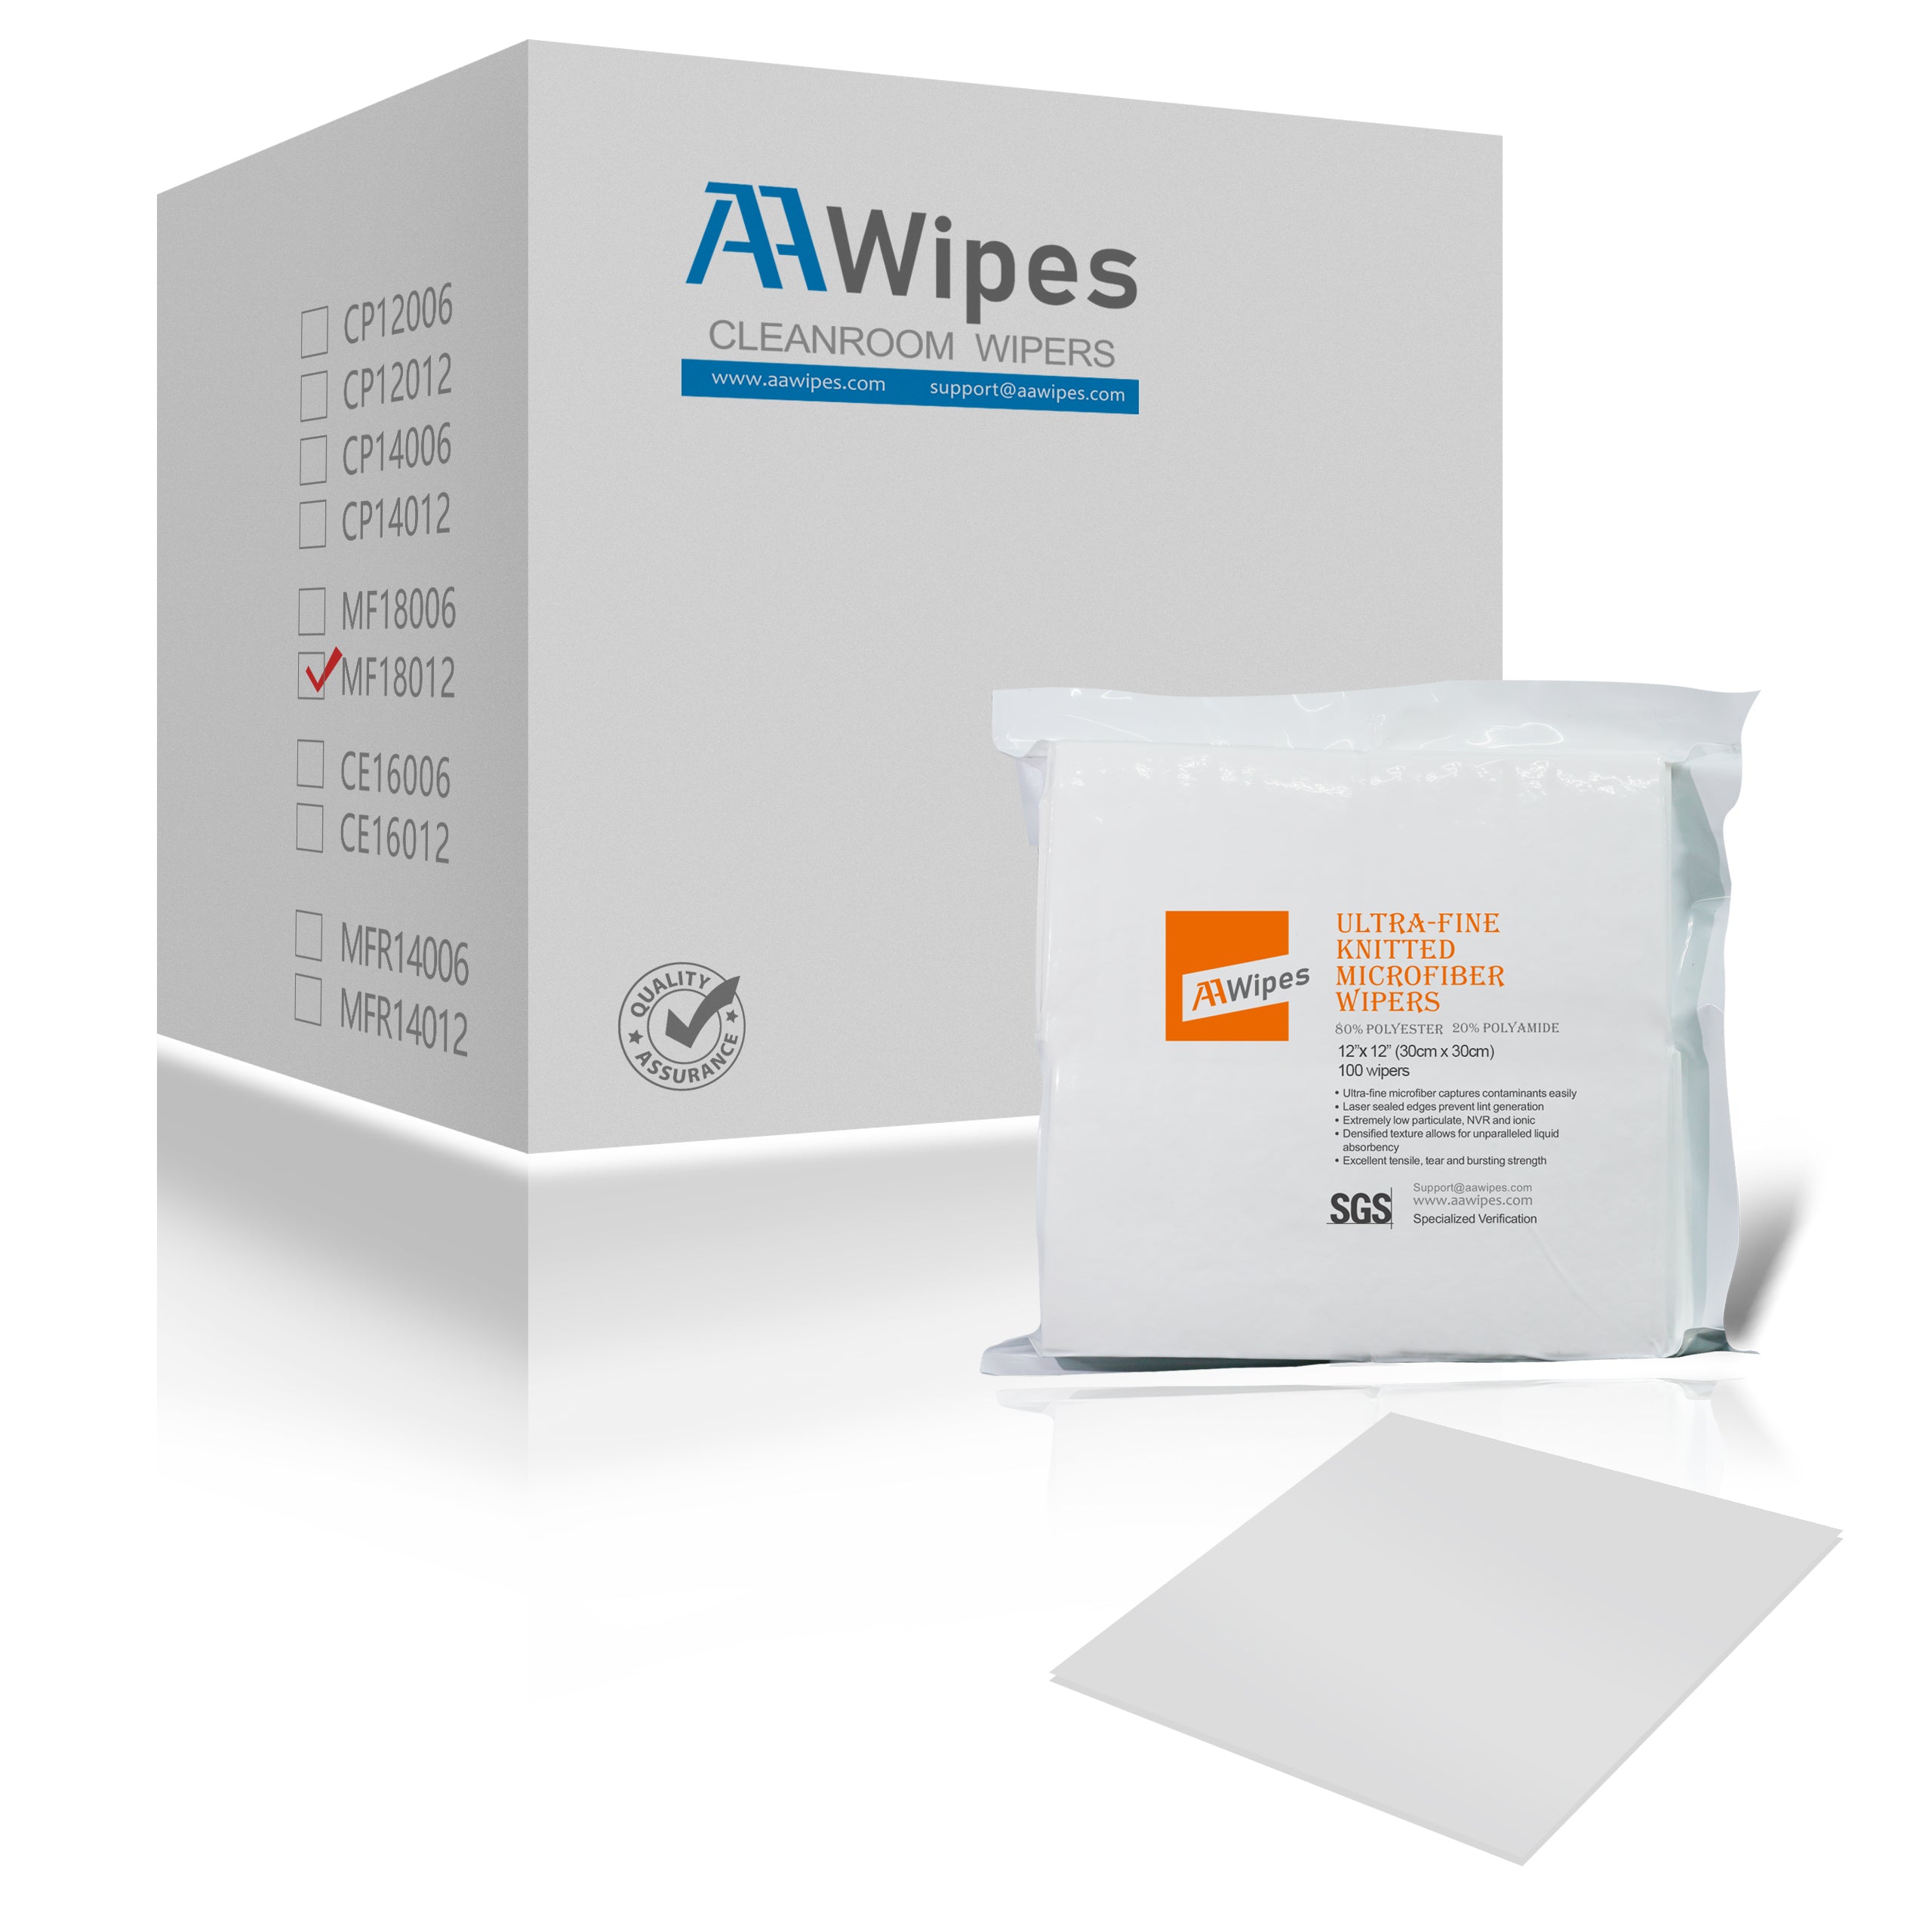 Critical Sanitory Cleanroom Ultrafine Microfiber Wipers 12"x12" (Starting at 1 Box with 1,000 Wipes per 10 Bags, 180gsm), Laser Sealed Edge, Class 100 Cloths (No. MF18012)